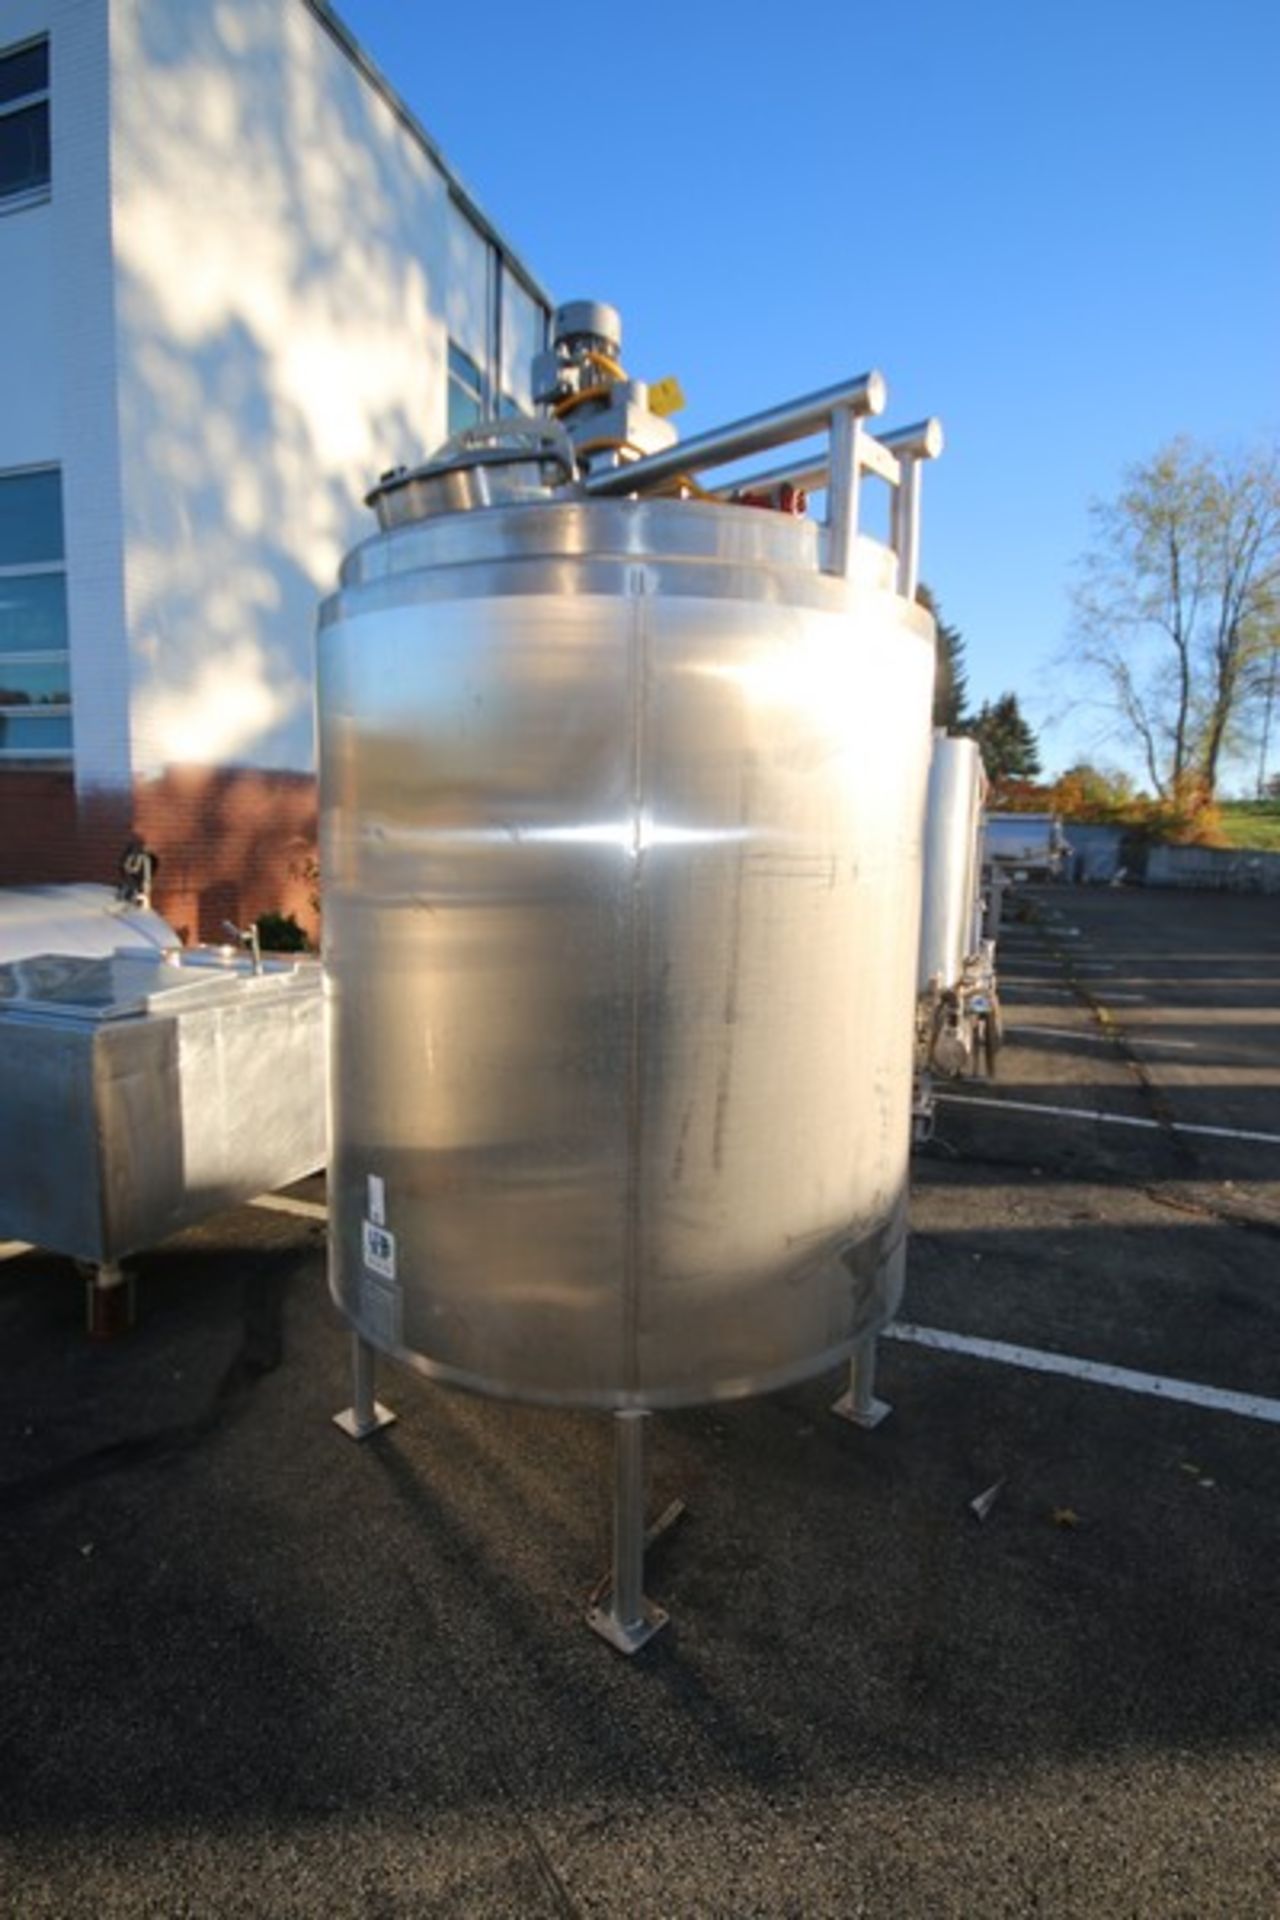 2015 A&B 600 Gal. Insulated Vertical S/S Mix Tank, M/N MIX TANK, S/N 1506690604, Mounted on S/S - Image 2 of 11